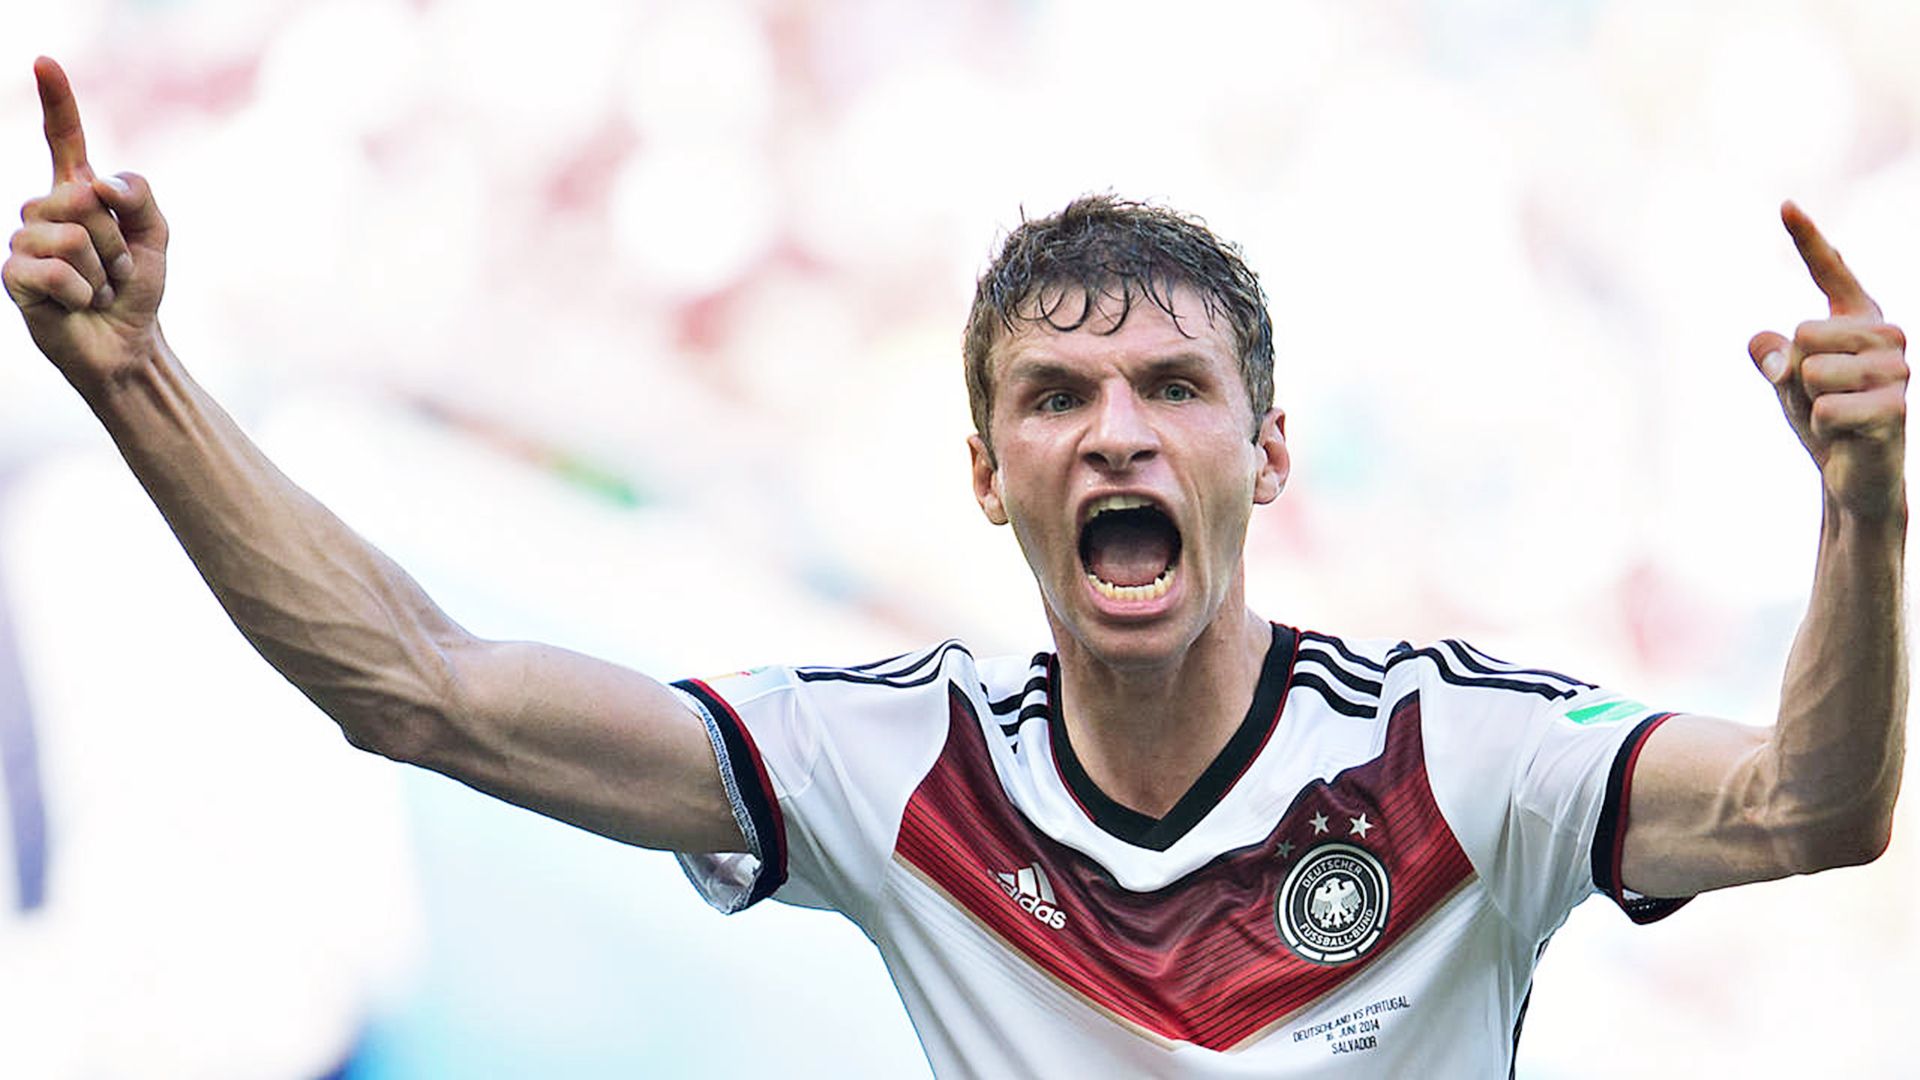 Free download Thomas Muller Wallpaper High Resolution and Quality Download [1920x1080] for your Desktop, Mobile & Tablet. Explore Thomas Wallpaper. Thomas The Train Desktop Wallpaper, Thomas Train Wallpaper, Thomas